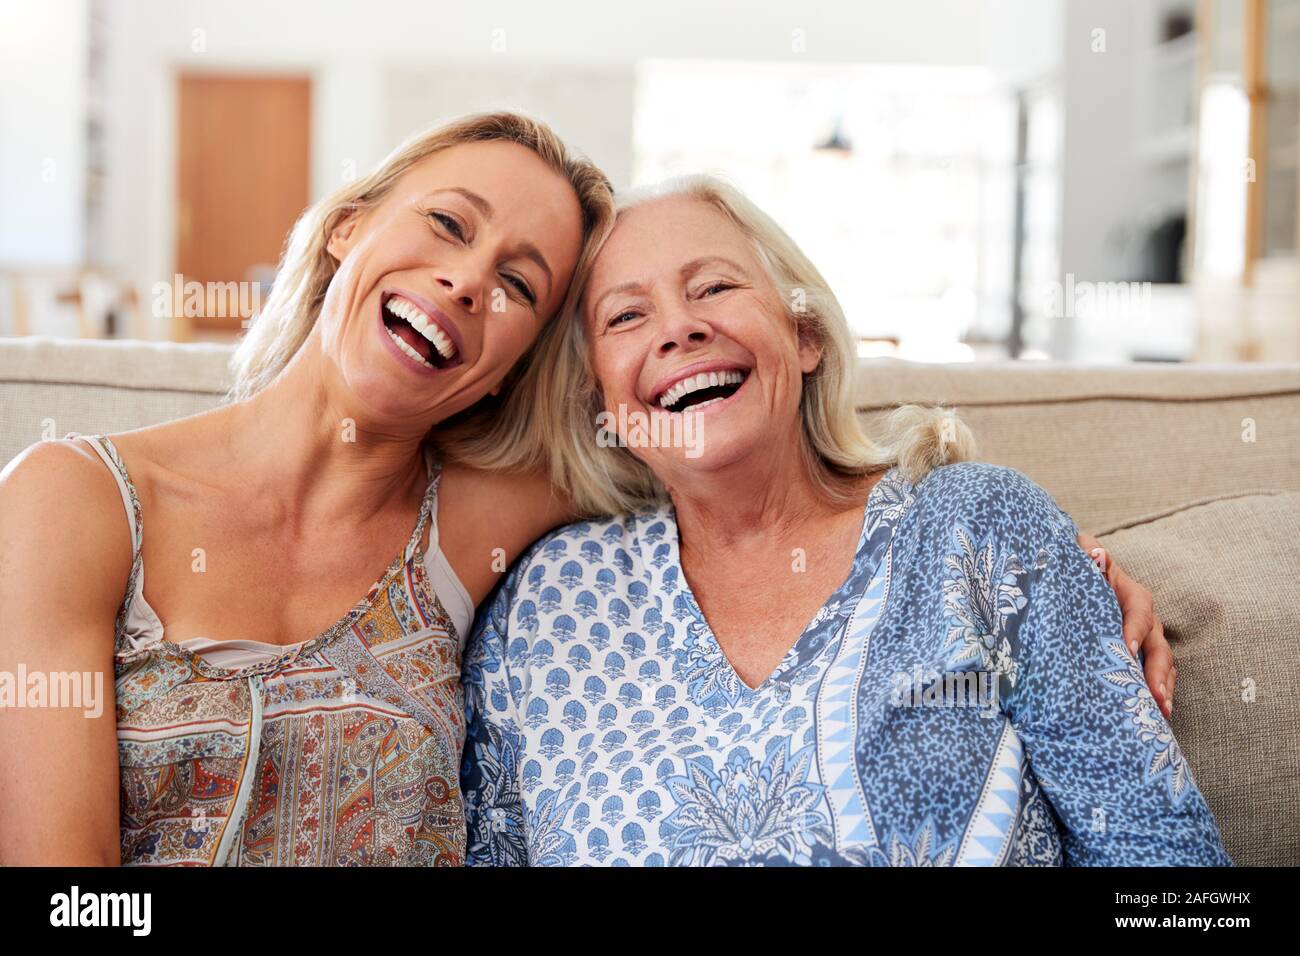 Portrait Of Smiling Mother and Daughter Relaxing On Sofa At Home Banque D'Images